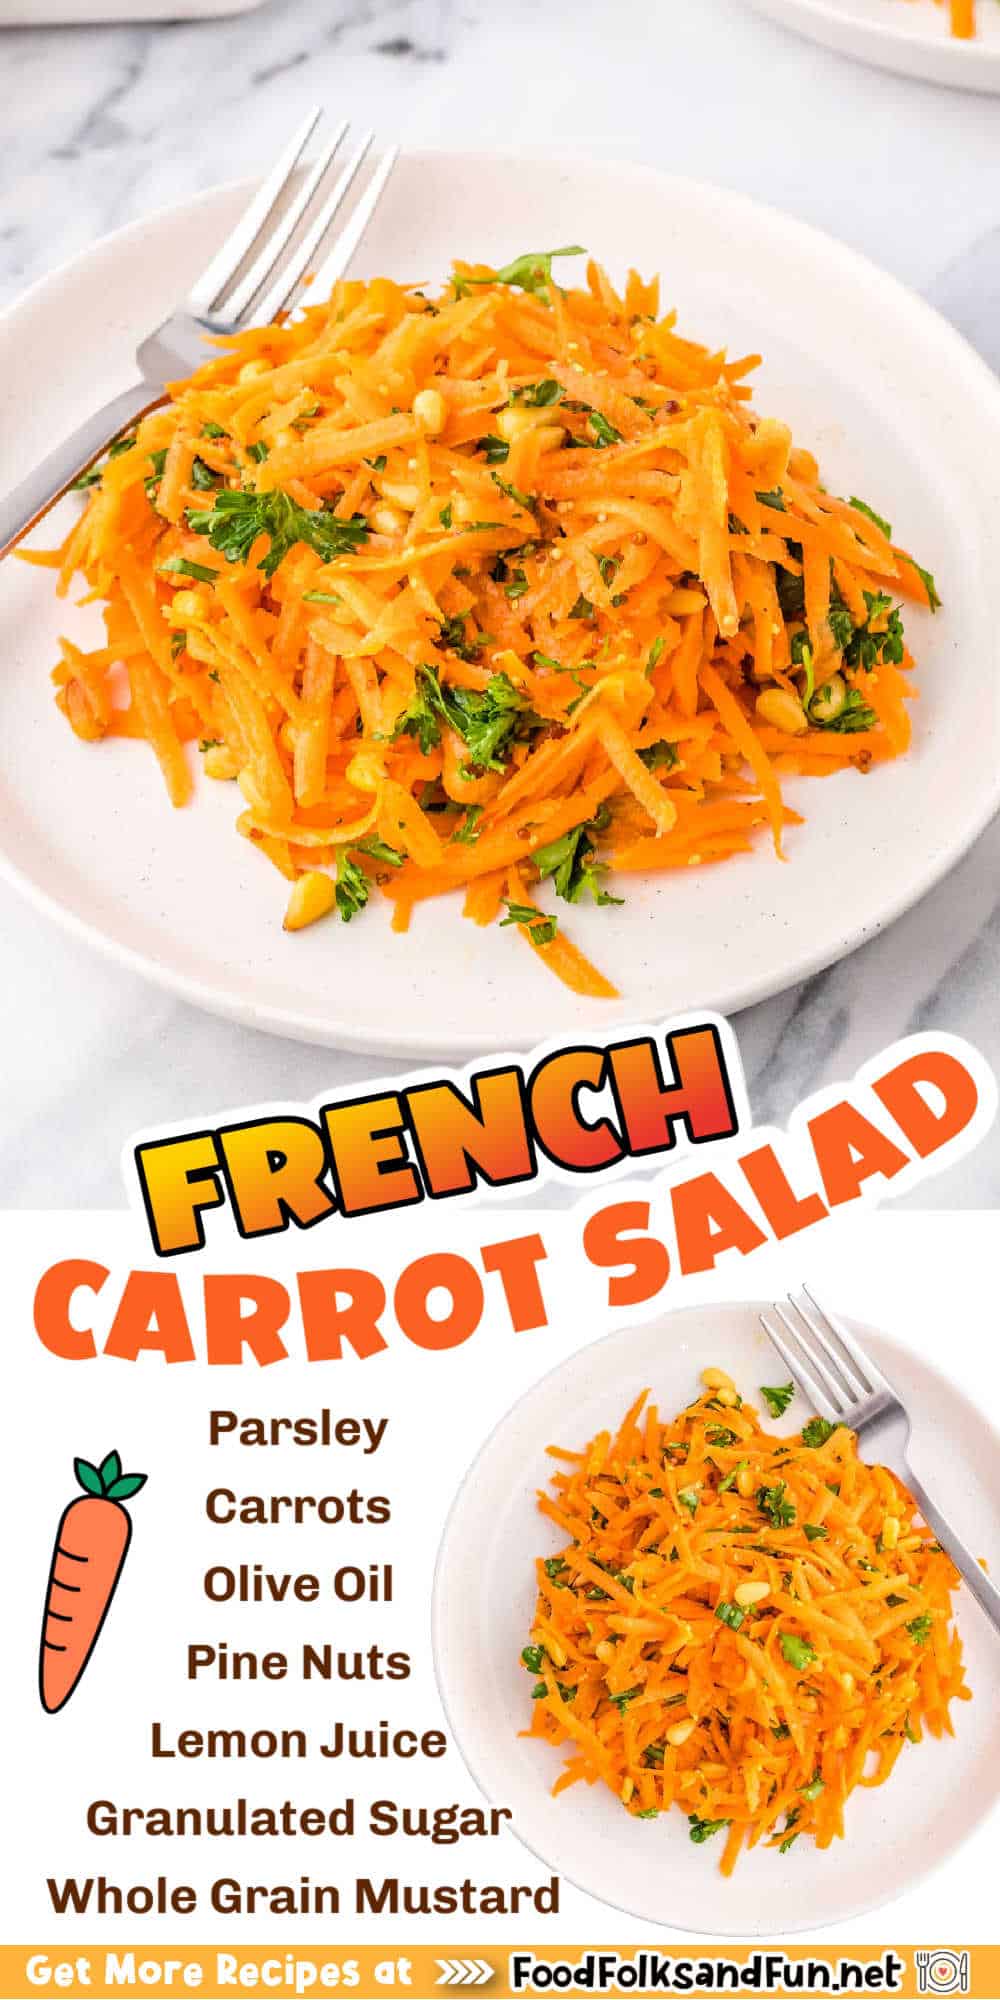 Indulge in the refreshing flavors of a classic French Carrot Salad. This recipe features crisp and colorful carrots, tossed in a zesty vinaigrette and fresh herbs. via @foodfolksandfun